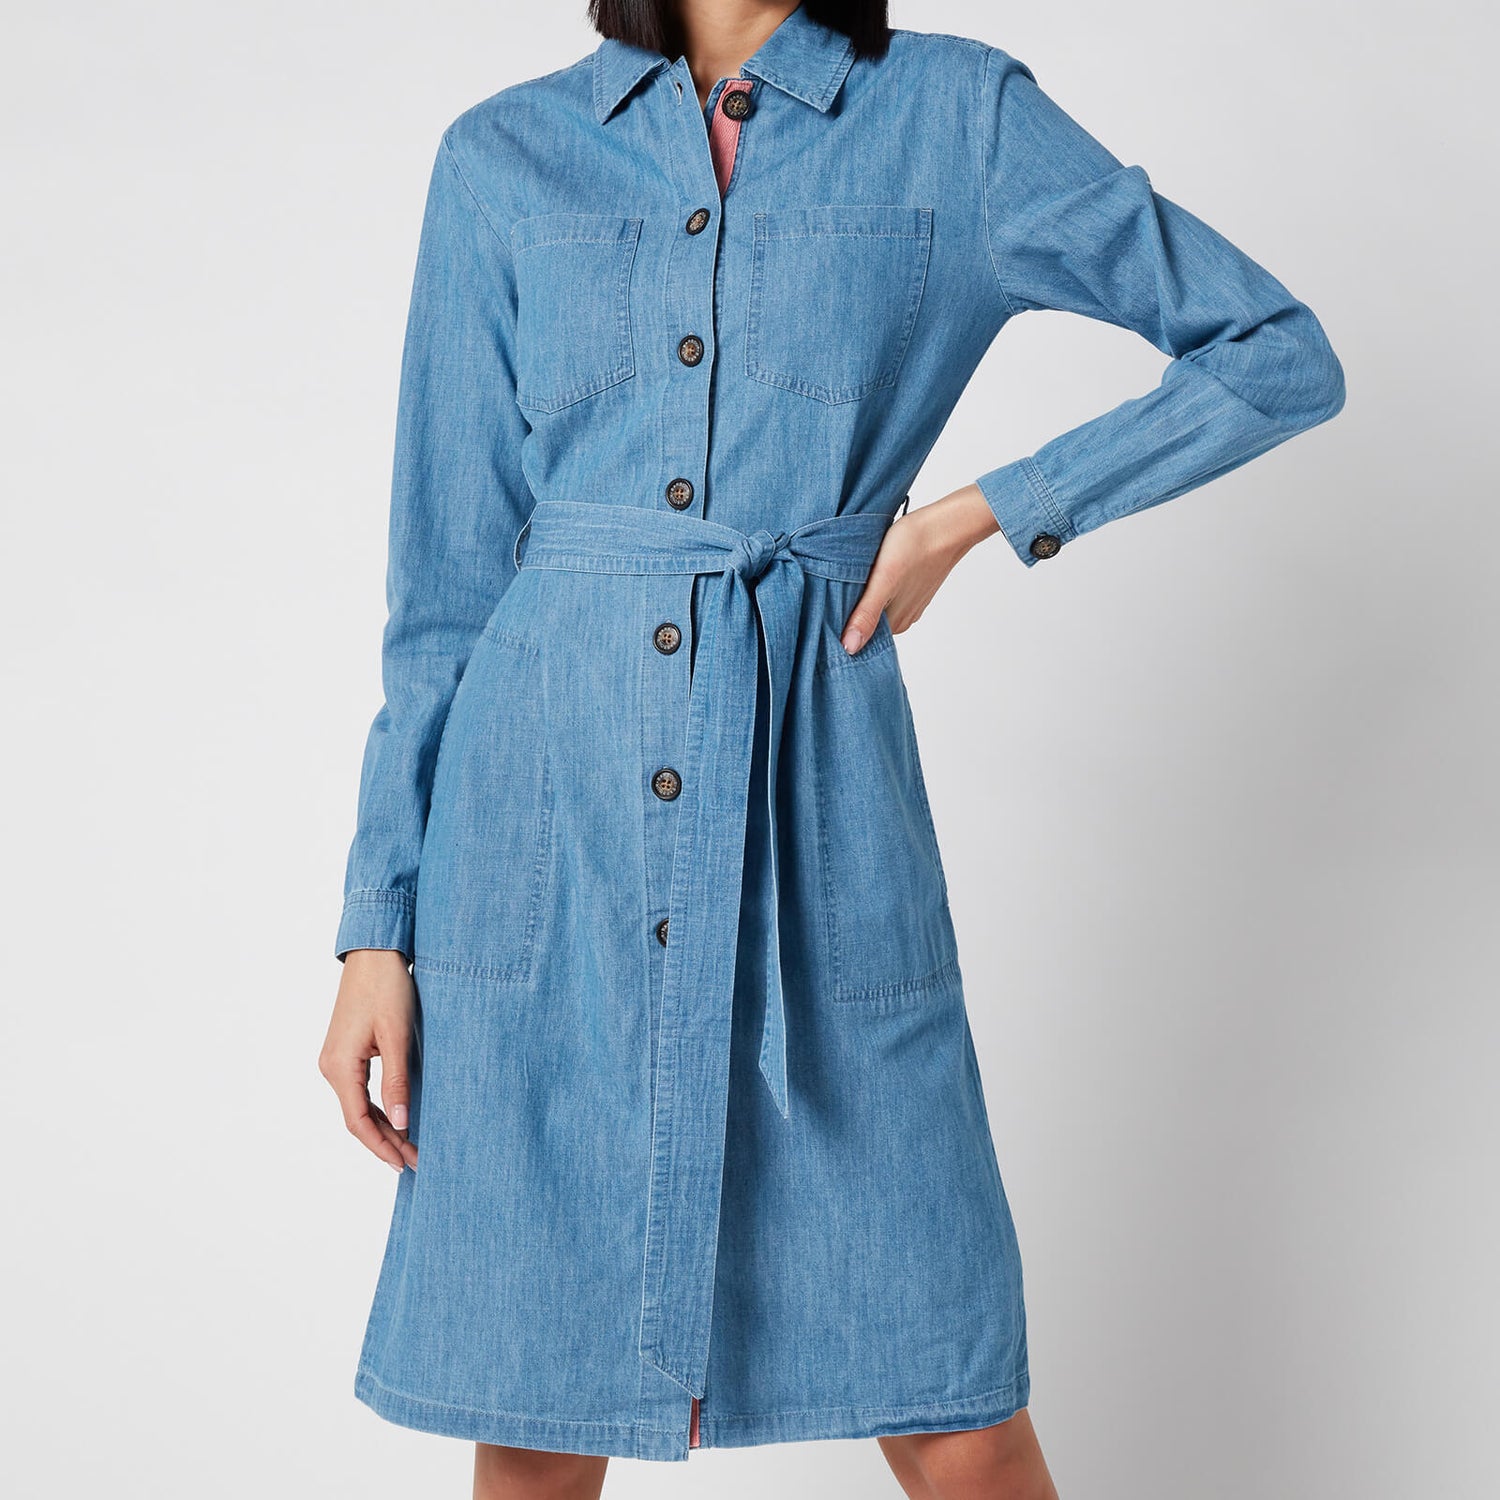 Barbour Women's Tynemth Dress - Authentic Wash